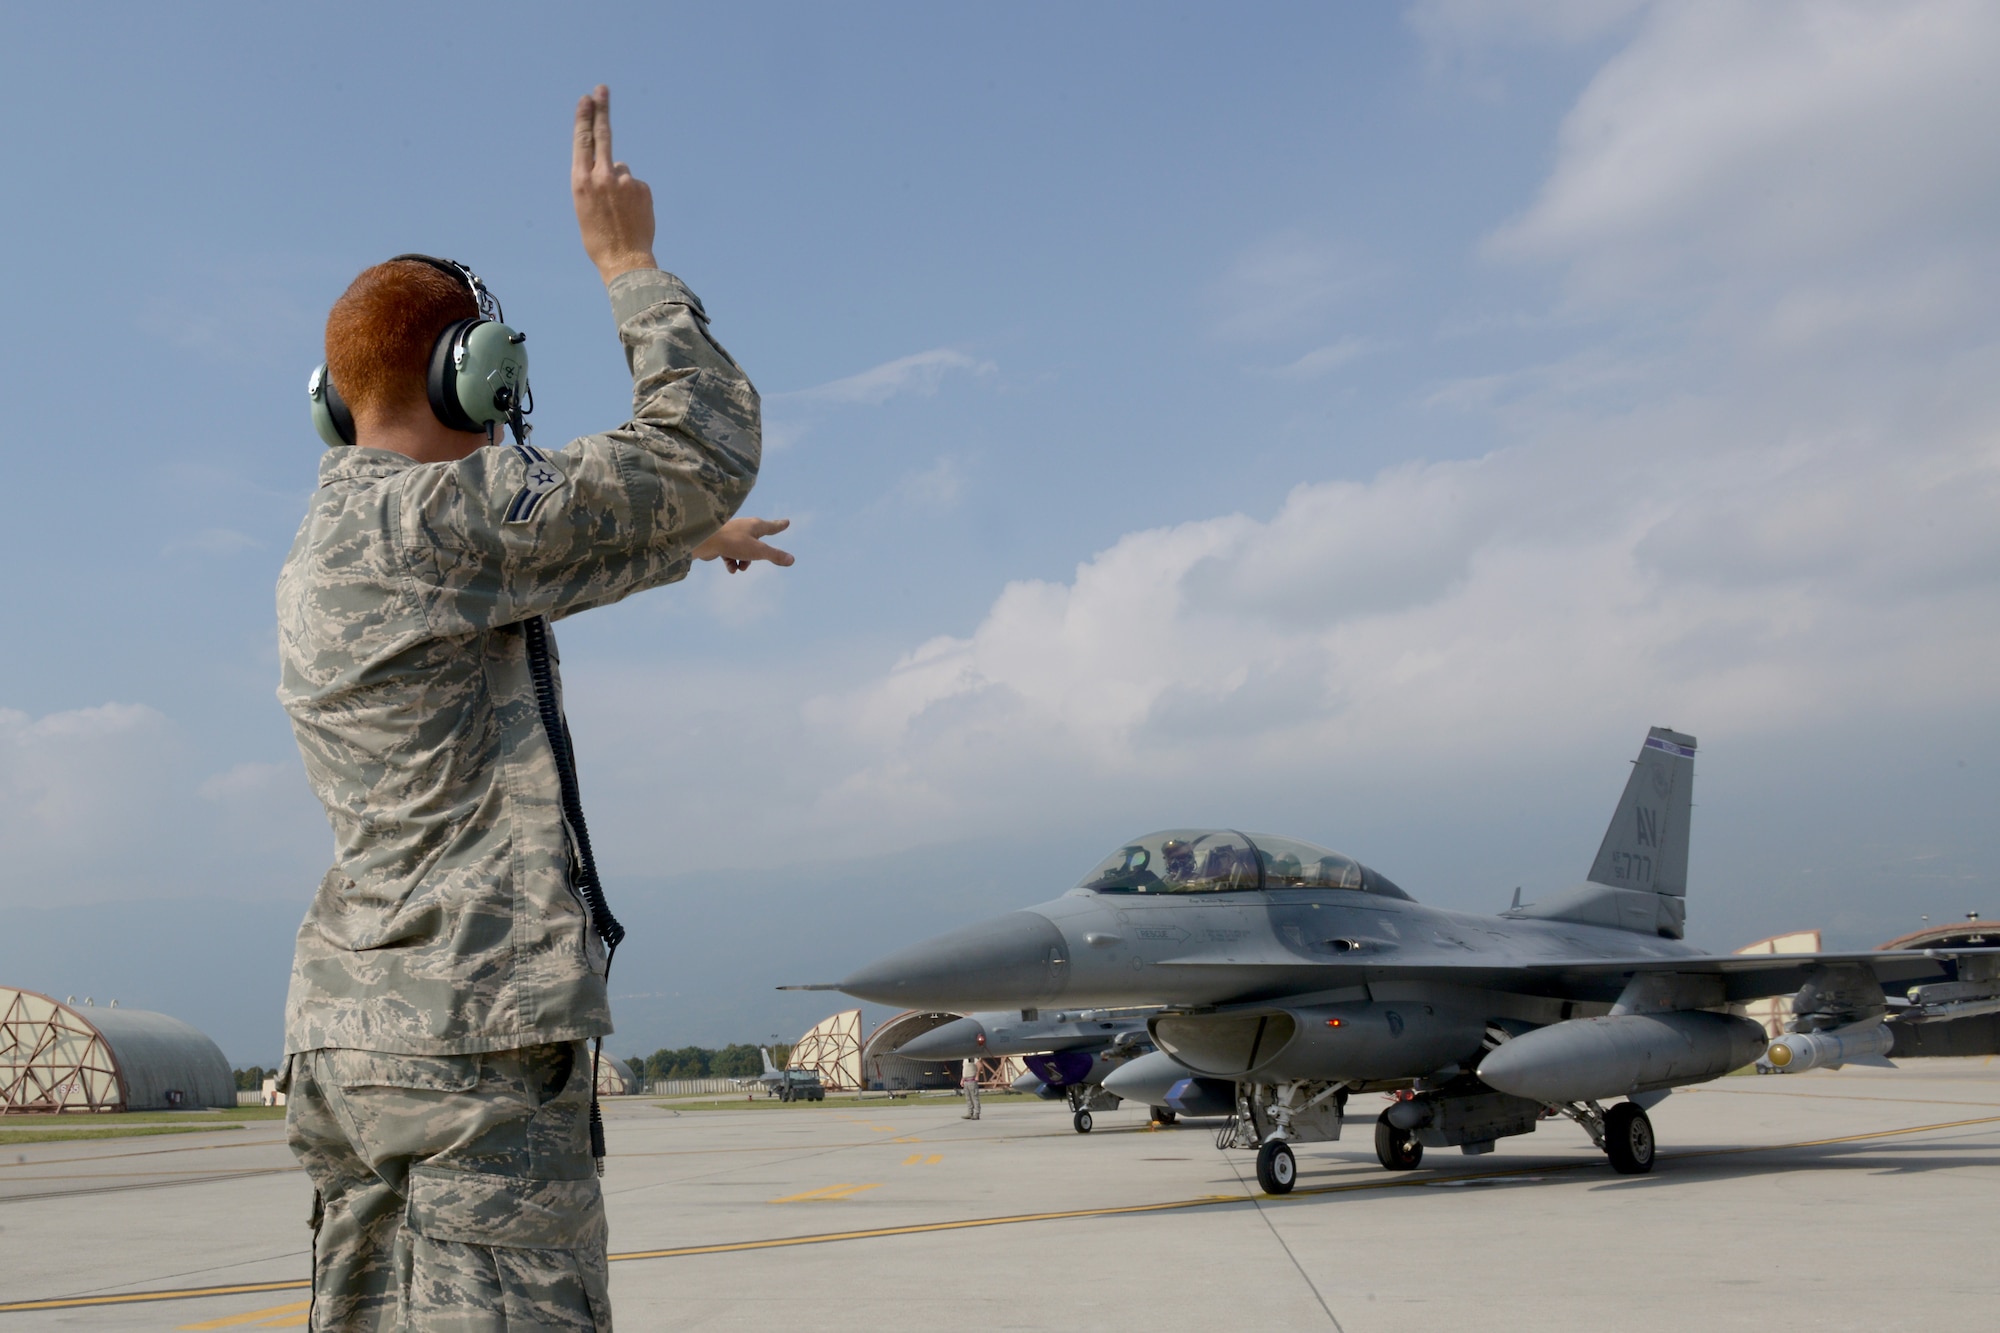 Airman 1st Class Matthew Galati, 31st Aircraft Maintenance Squadron crew chief, marshals an F-16 Fighting Falcon to taxi onto the flightline, Oct. 7, 2014, at Aviano Air Base, Italy. Aircraft marshalling is a visual signaling between ground personnel and pilots and serves as an alternative to radio communications. (U.S. Air Force photo/Airman 1st Class Ryan Conroy) 